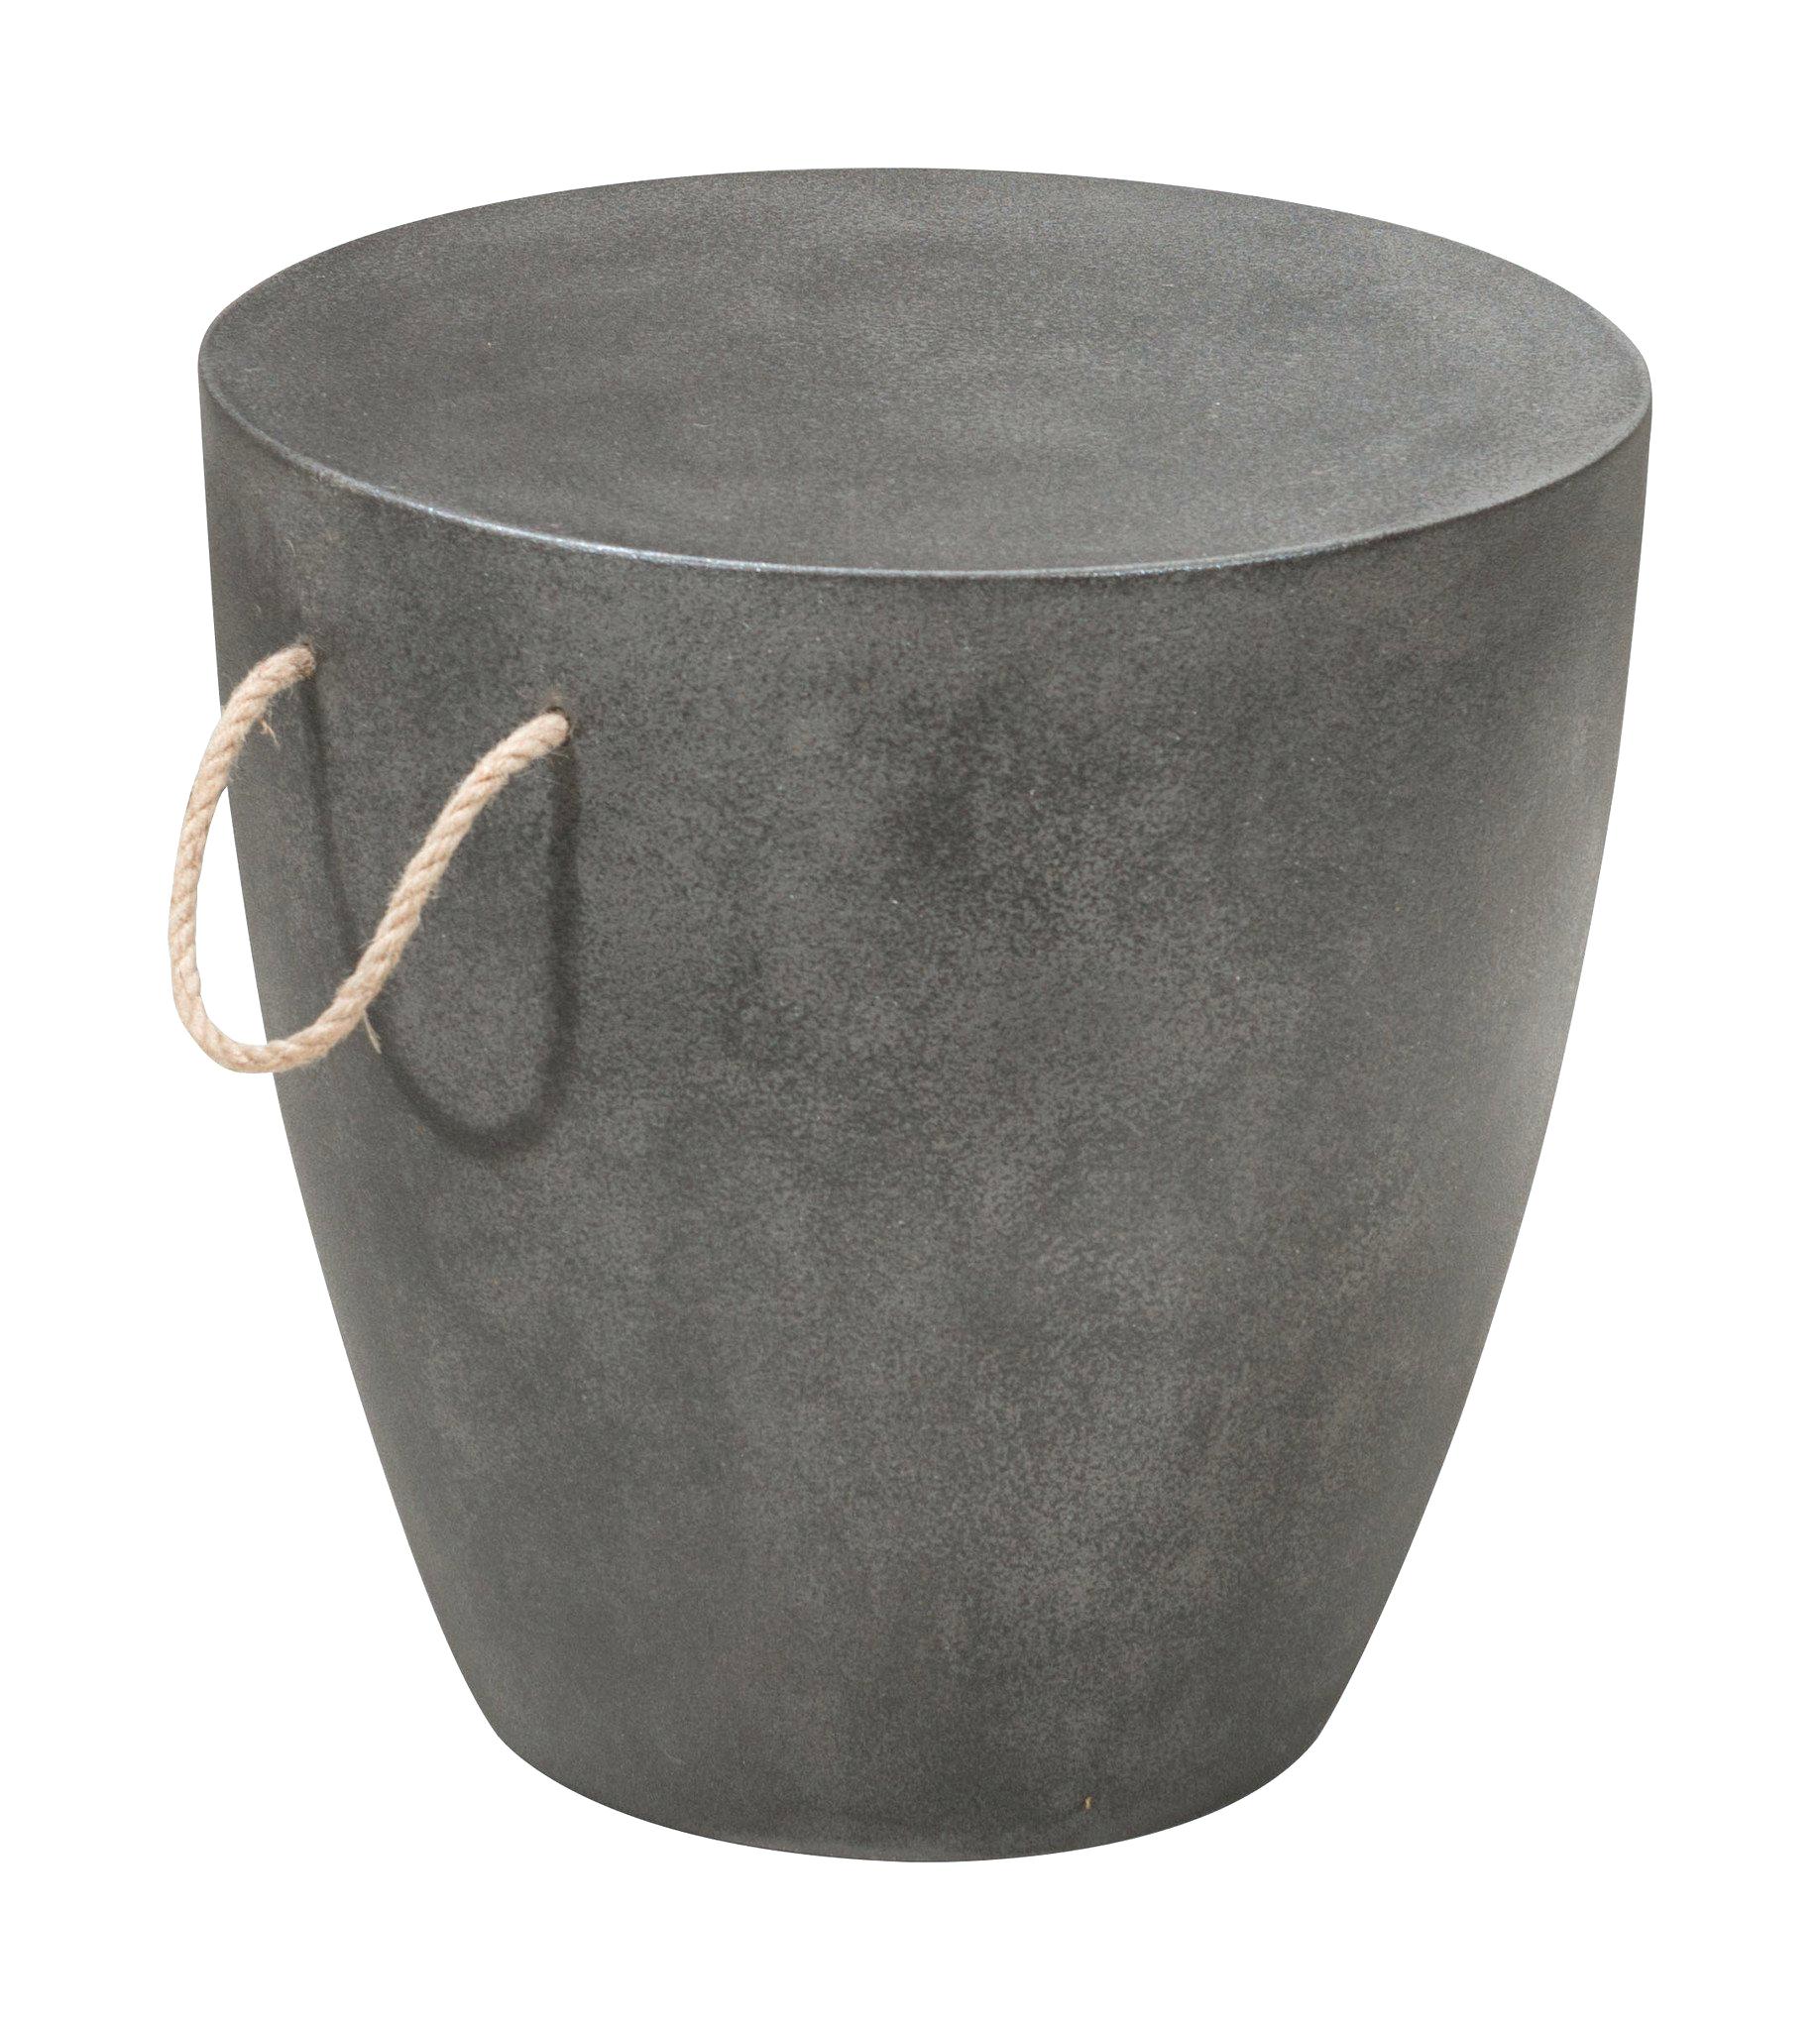 drum accent table threshold metal target cylinder side gold cala hammered silver storage moroccan lamp round coffee with sage green tables grey armchair tablecloths for large